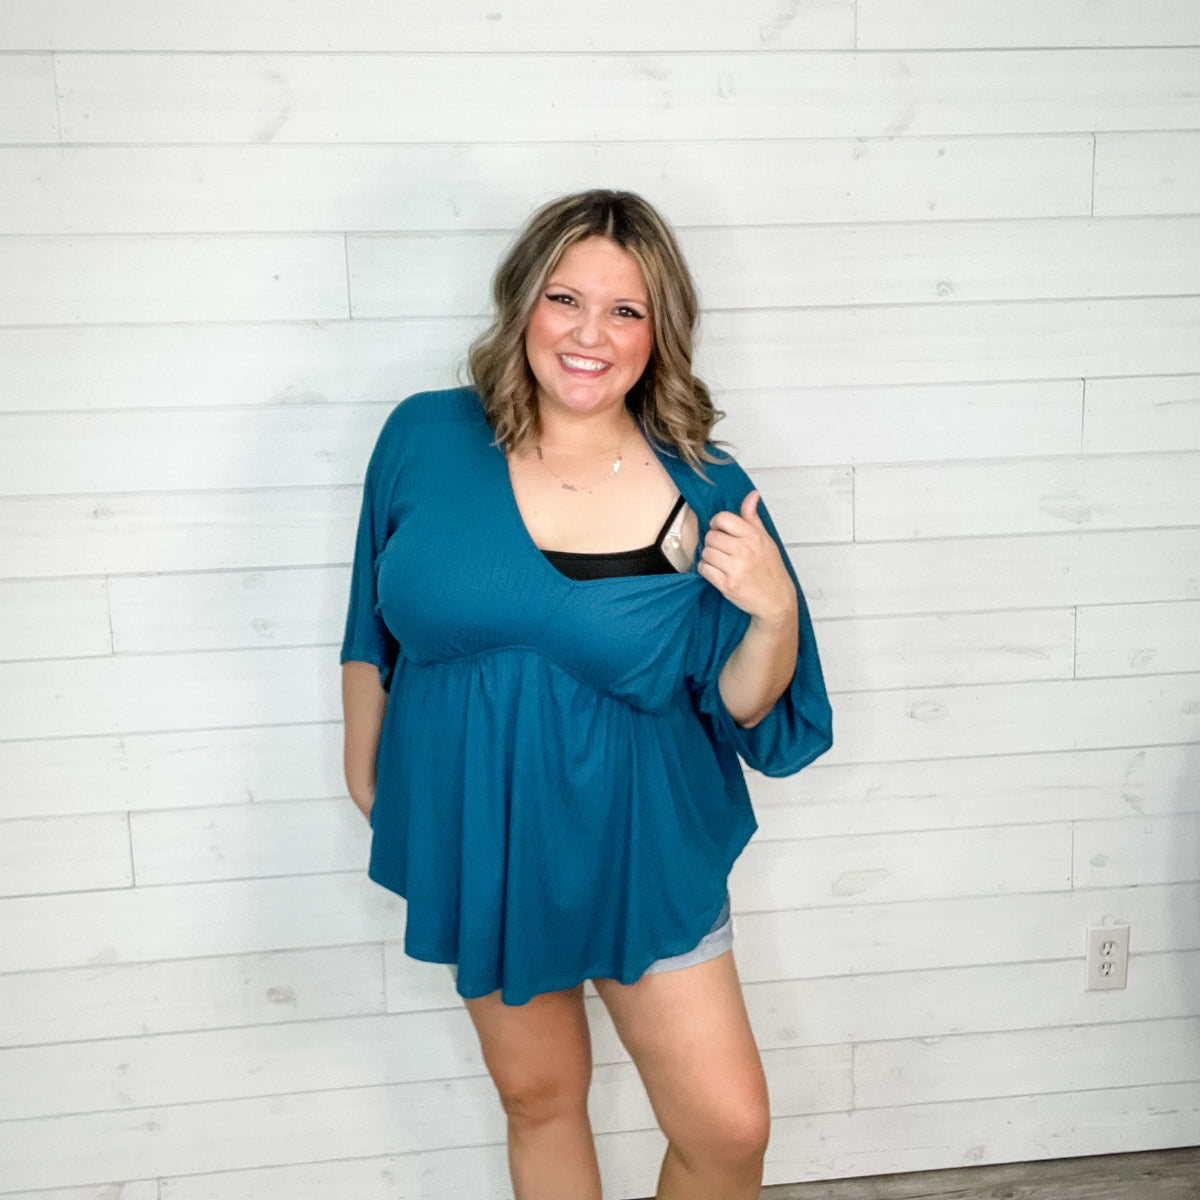 "Kelce" V Neck Dolman Style with Empire Detail (Teal)